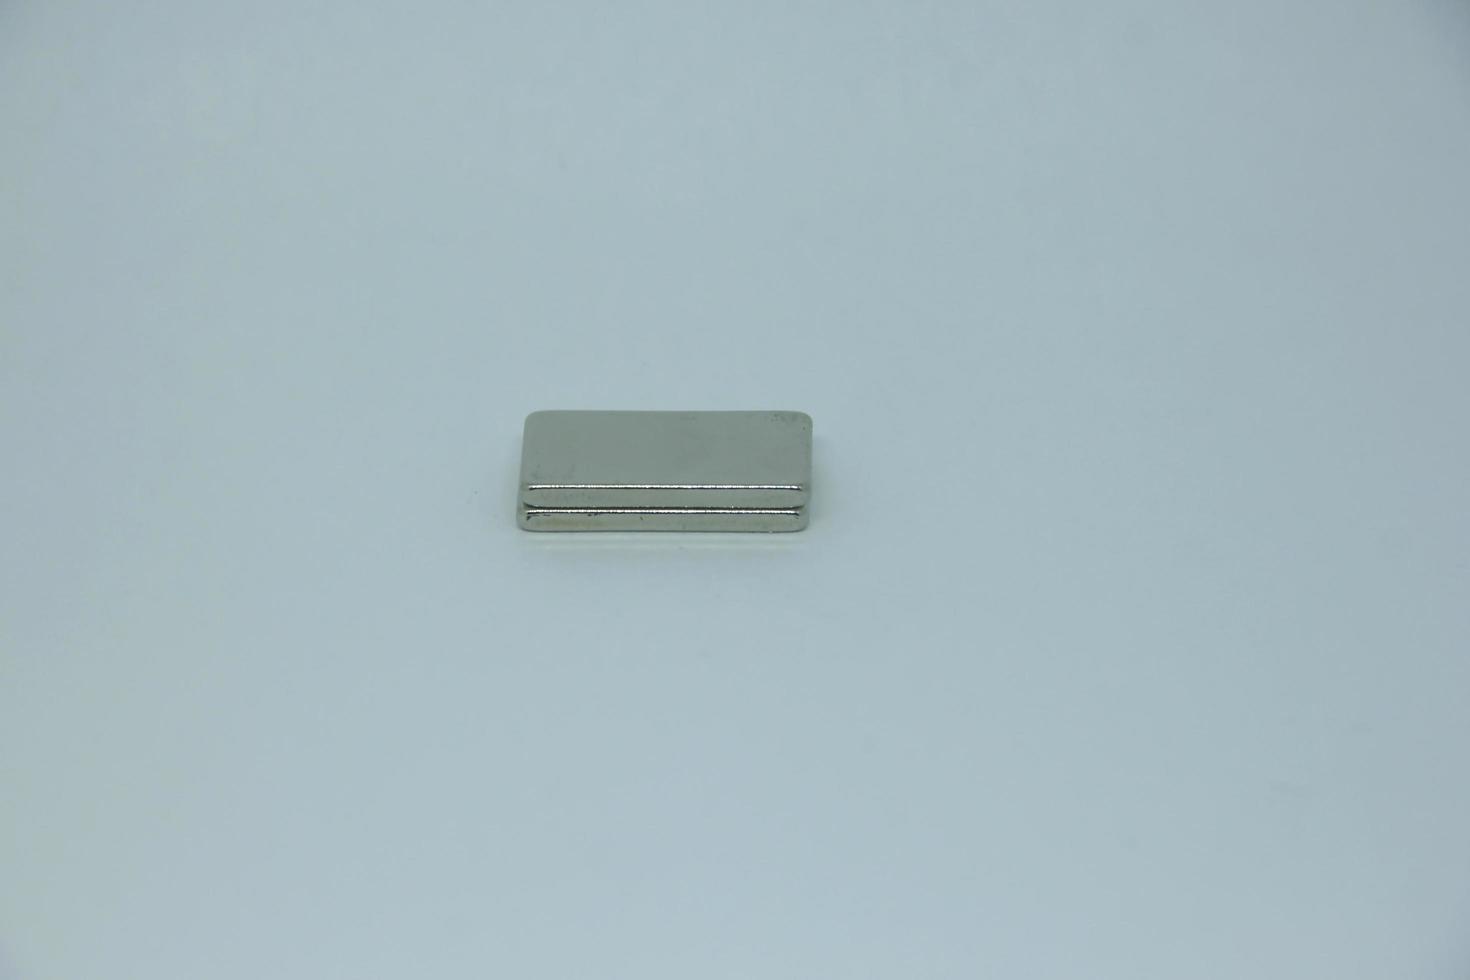 A couple of two small magnet bar with rectangle shape. Isolated object photo on white background.